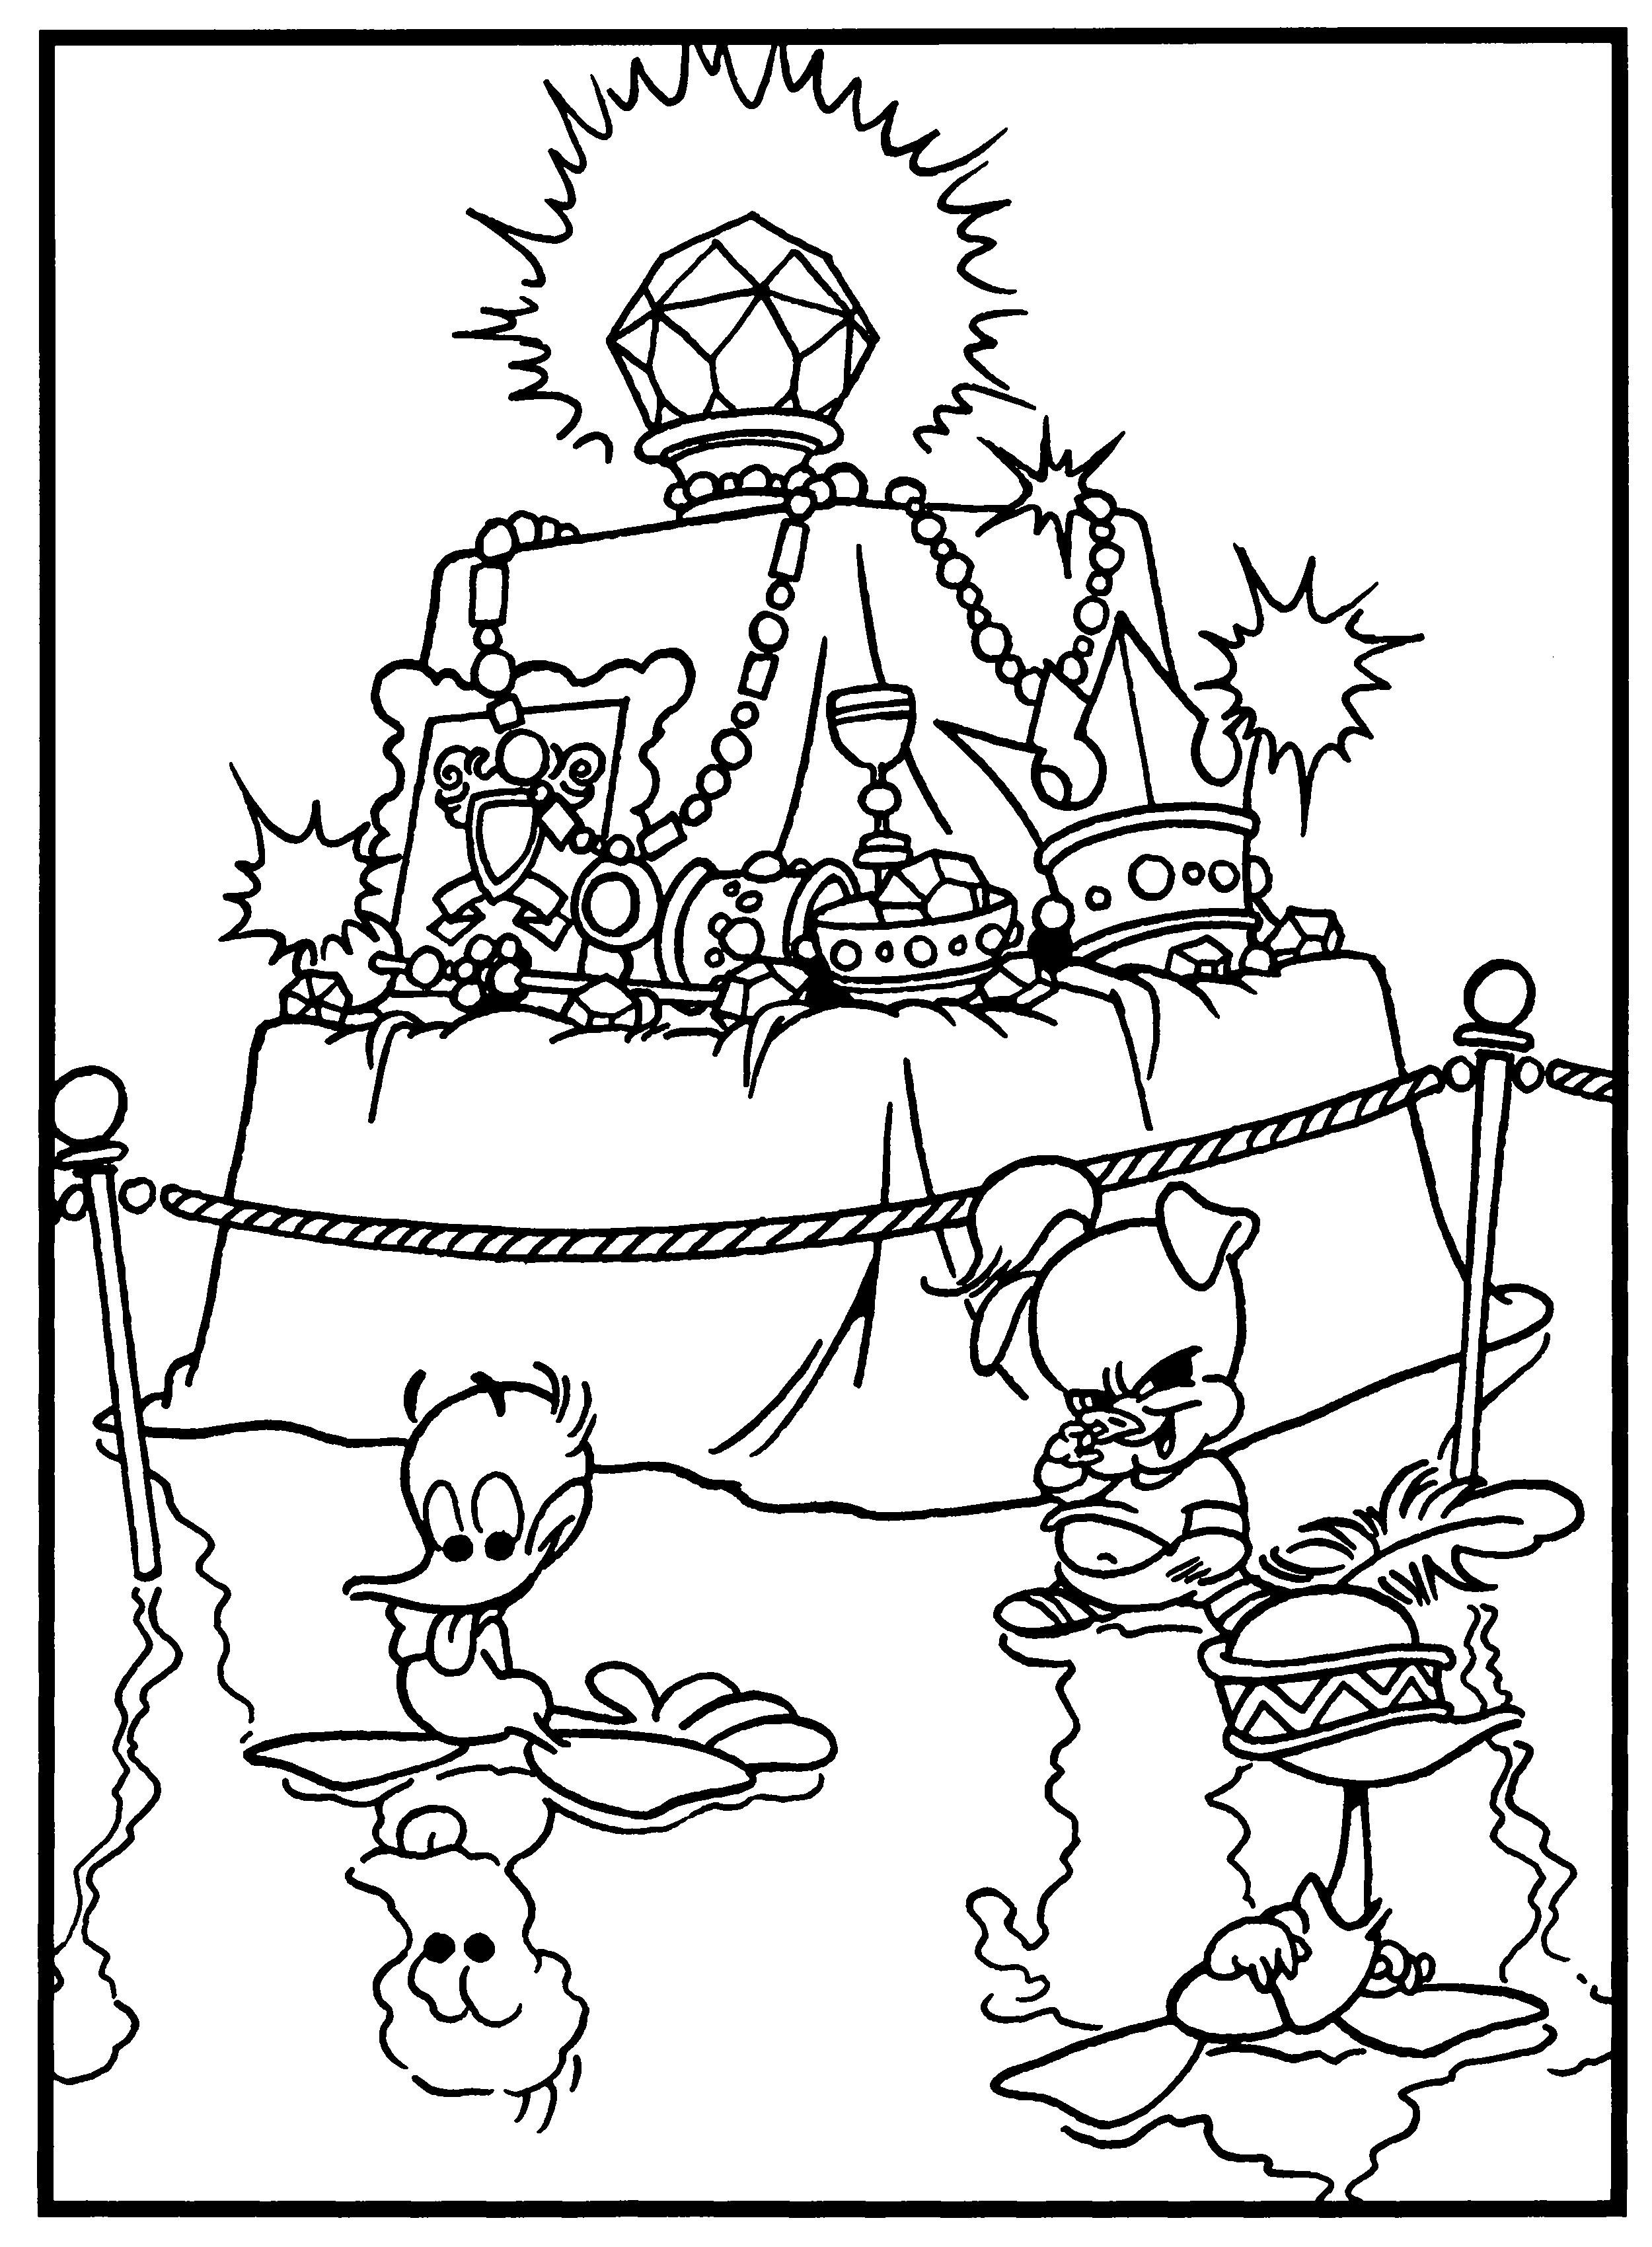 Alfred J Kwak Free coloring page